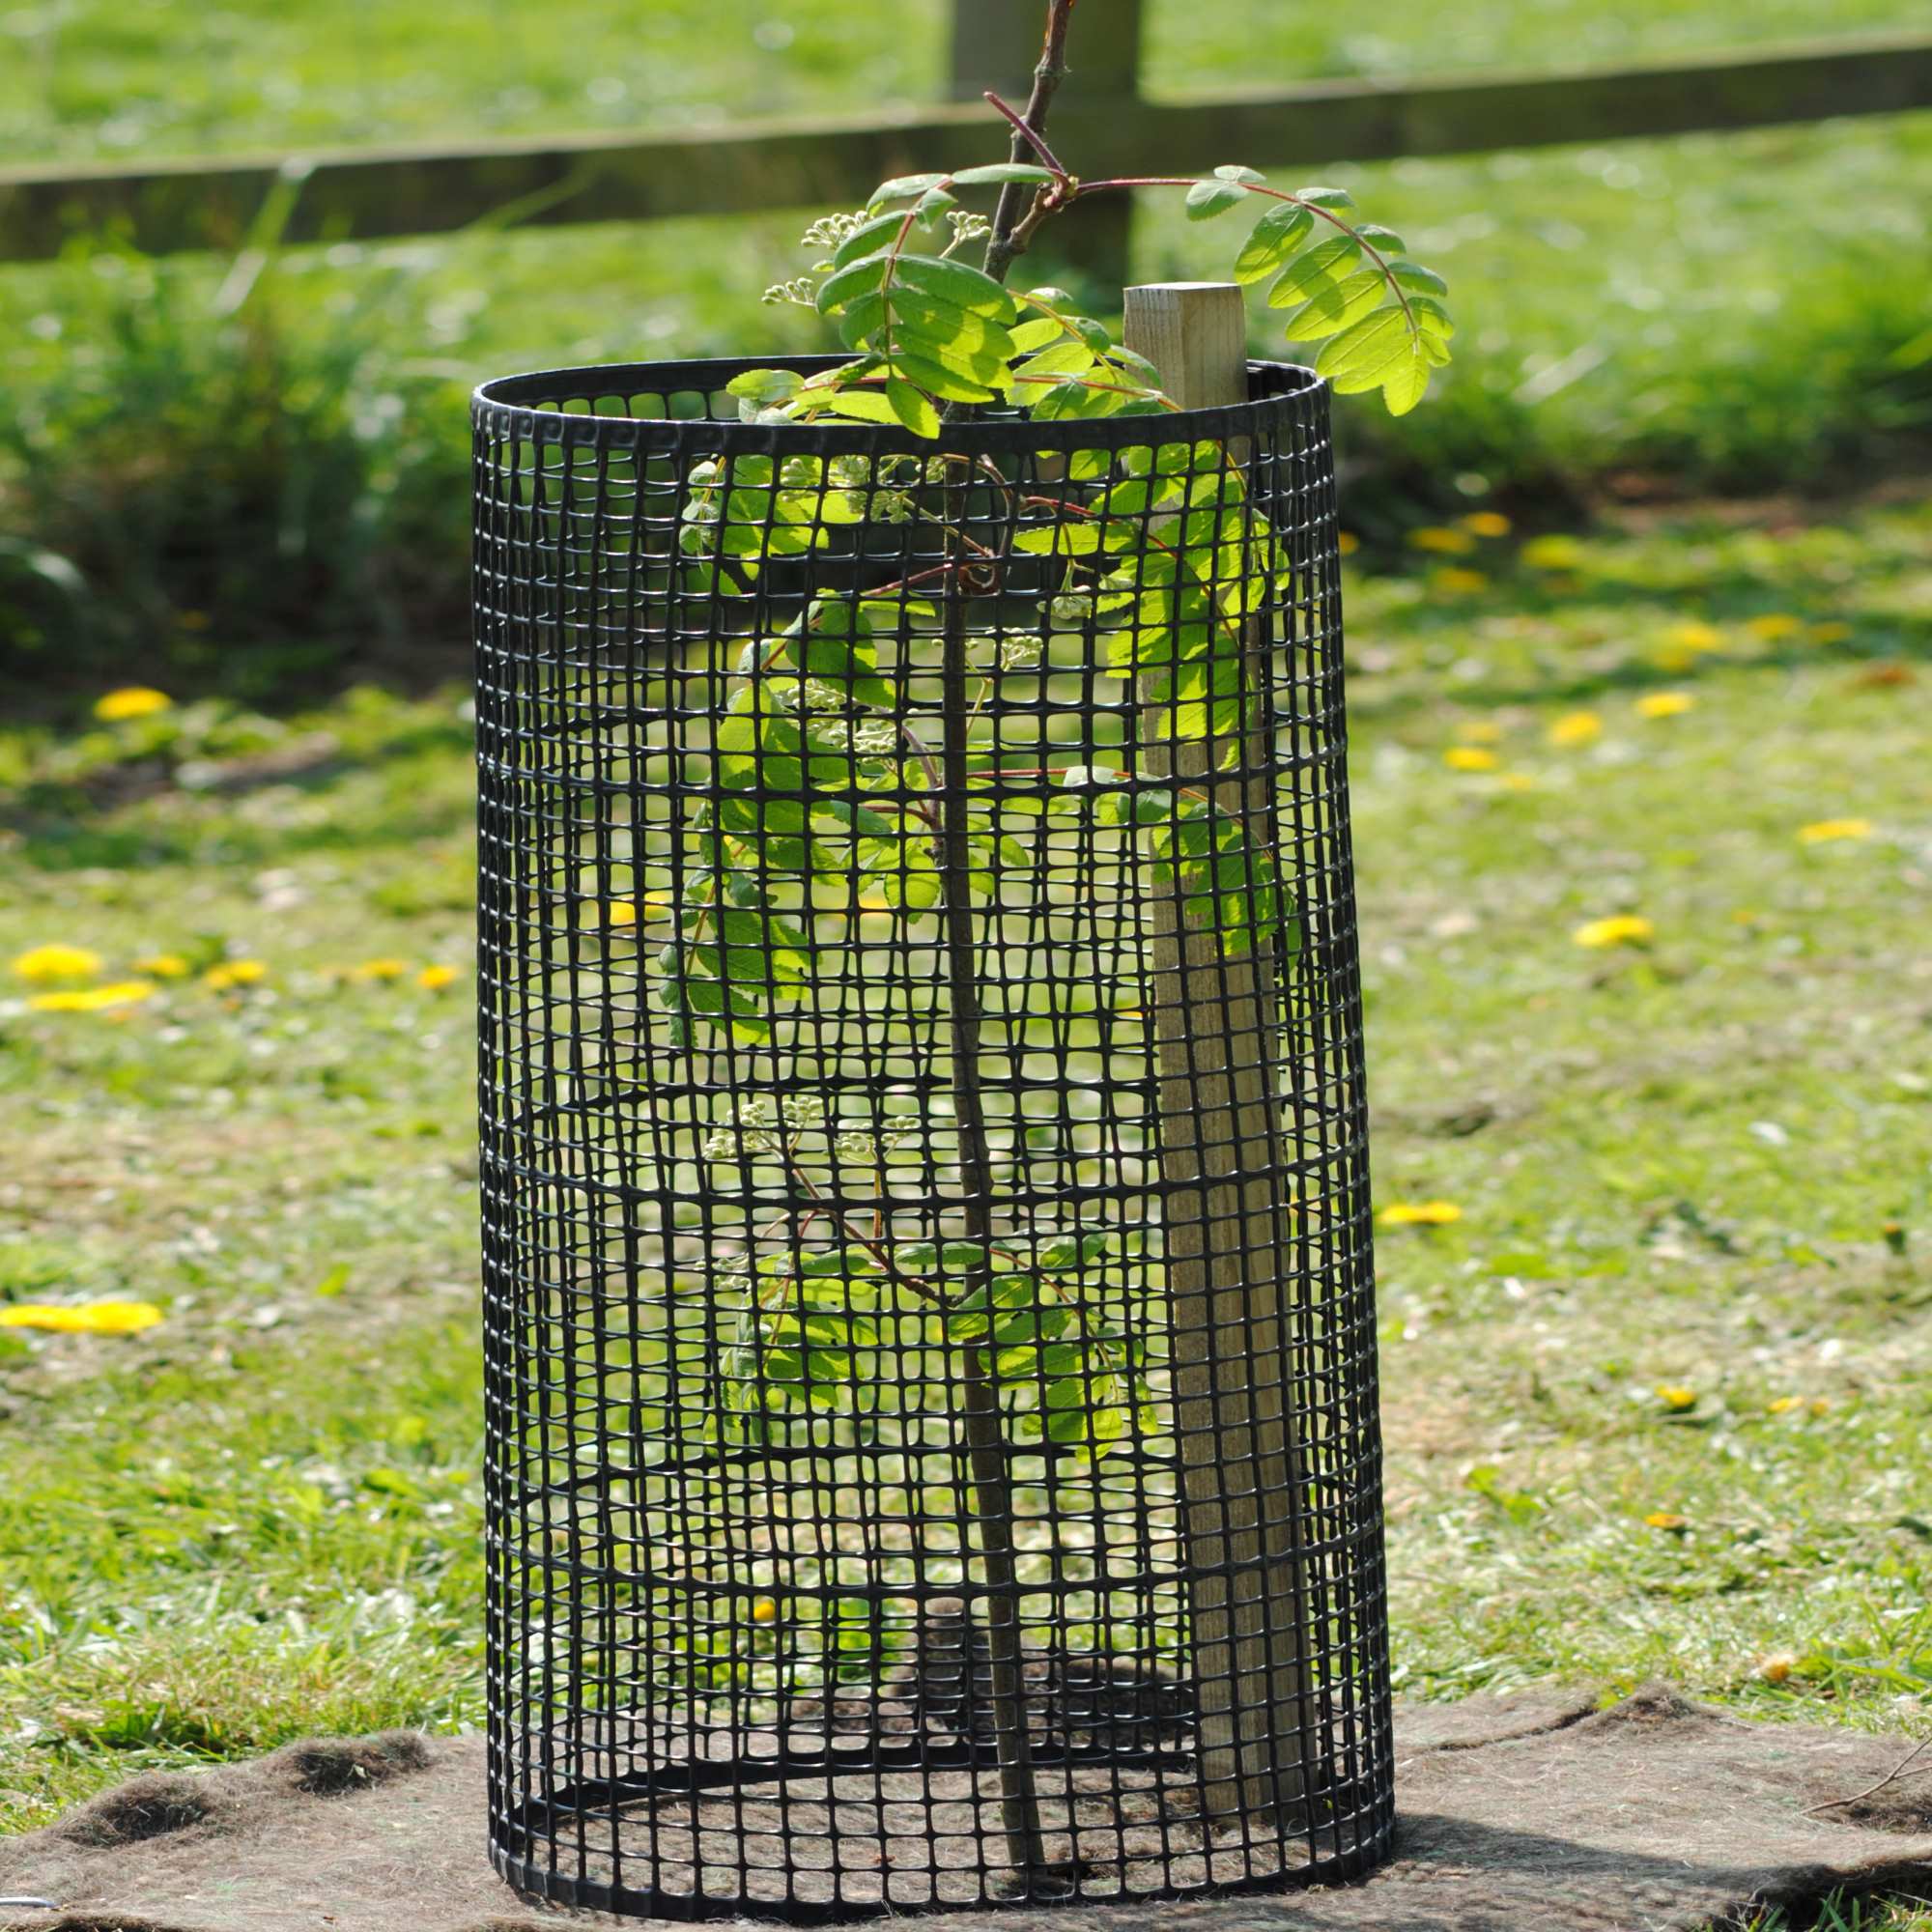 plant cages to protect from rabbits